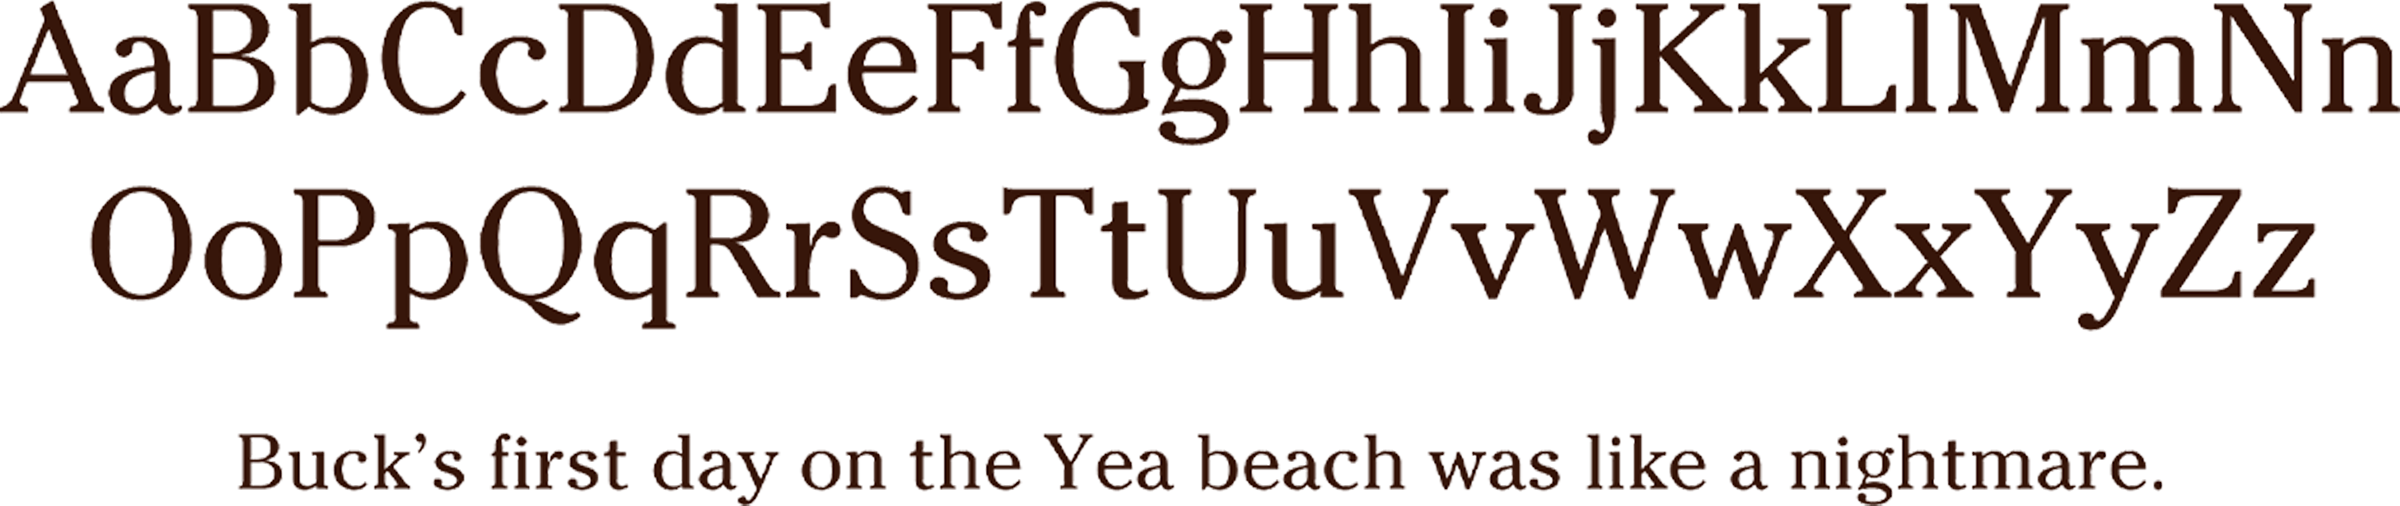 Characters from the Cheltenham typeface